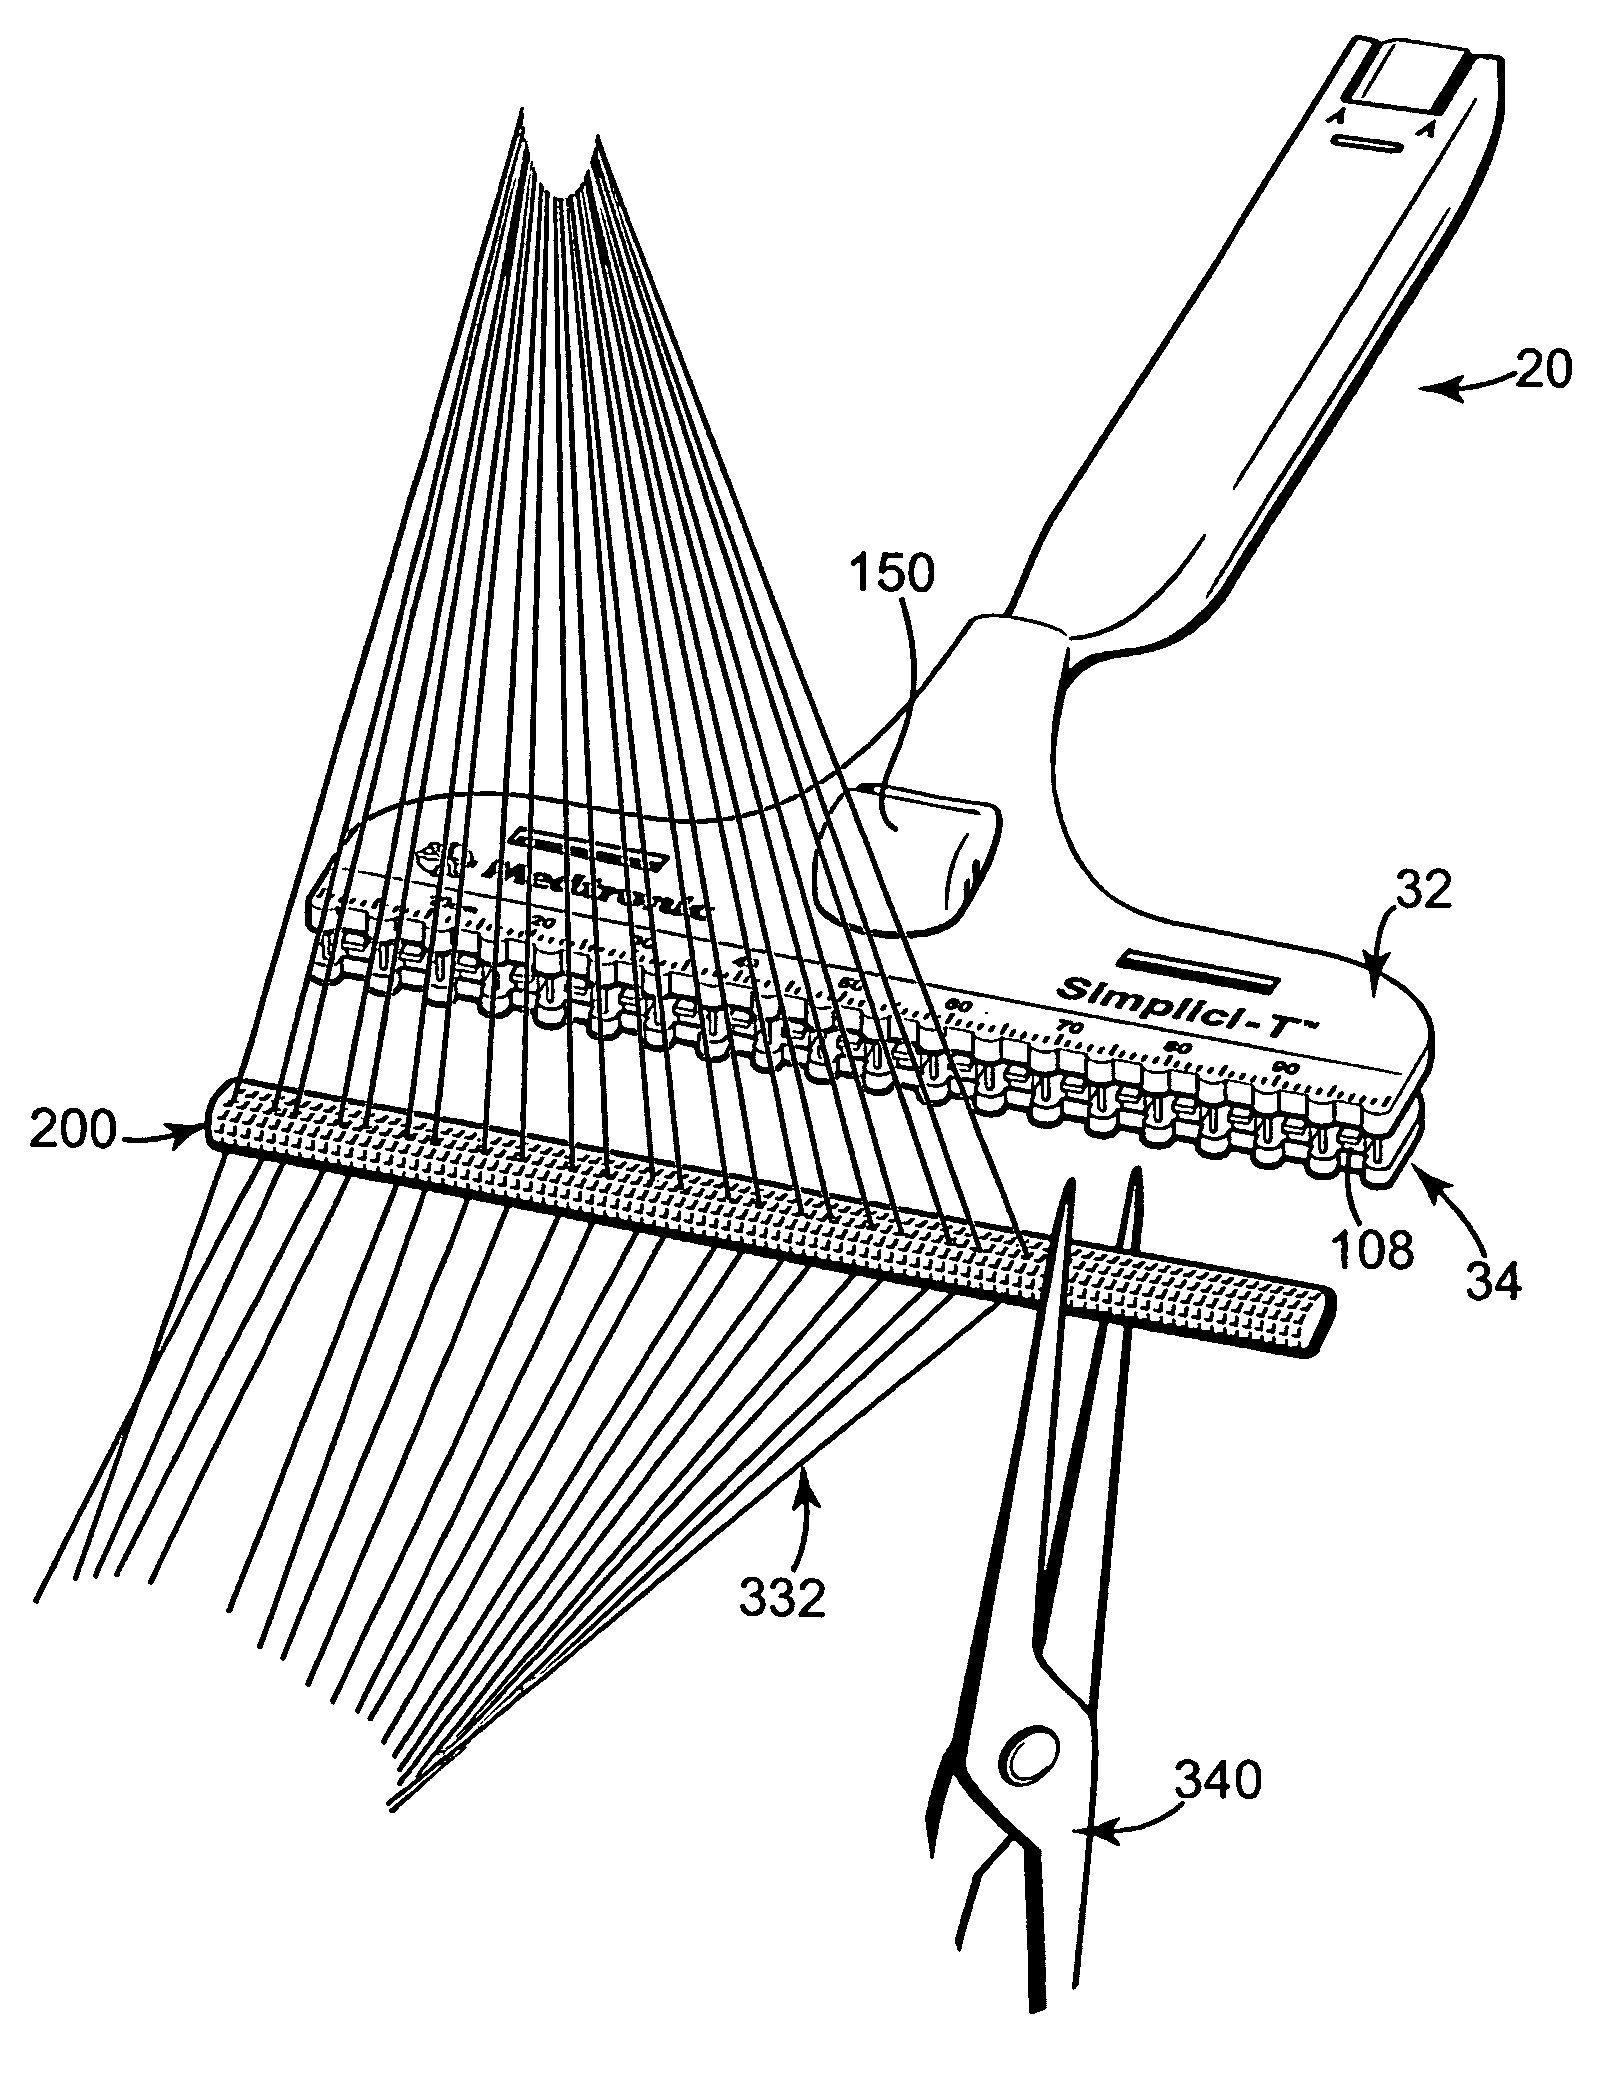 Method of implanting an annuloplasty prosthesis